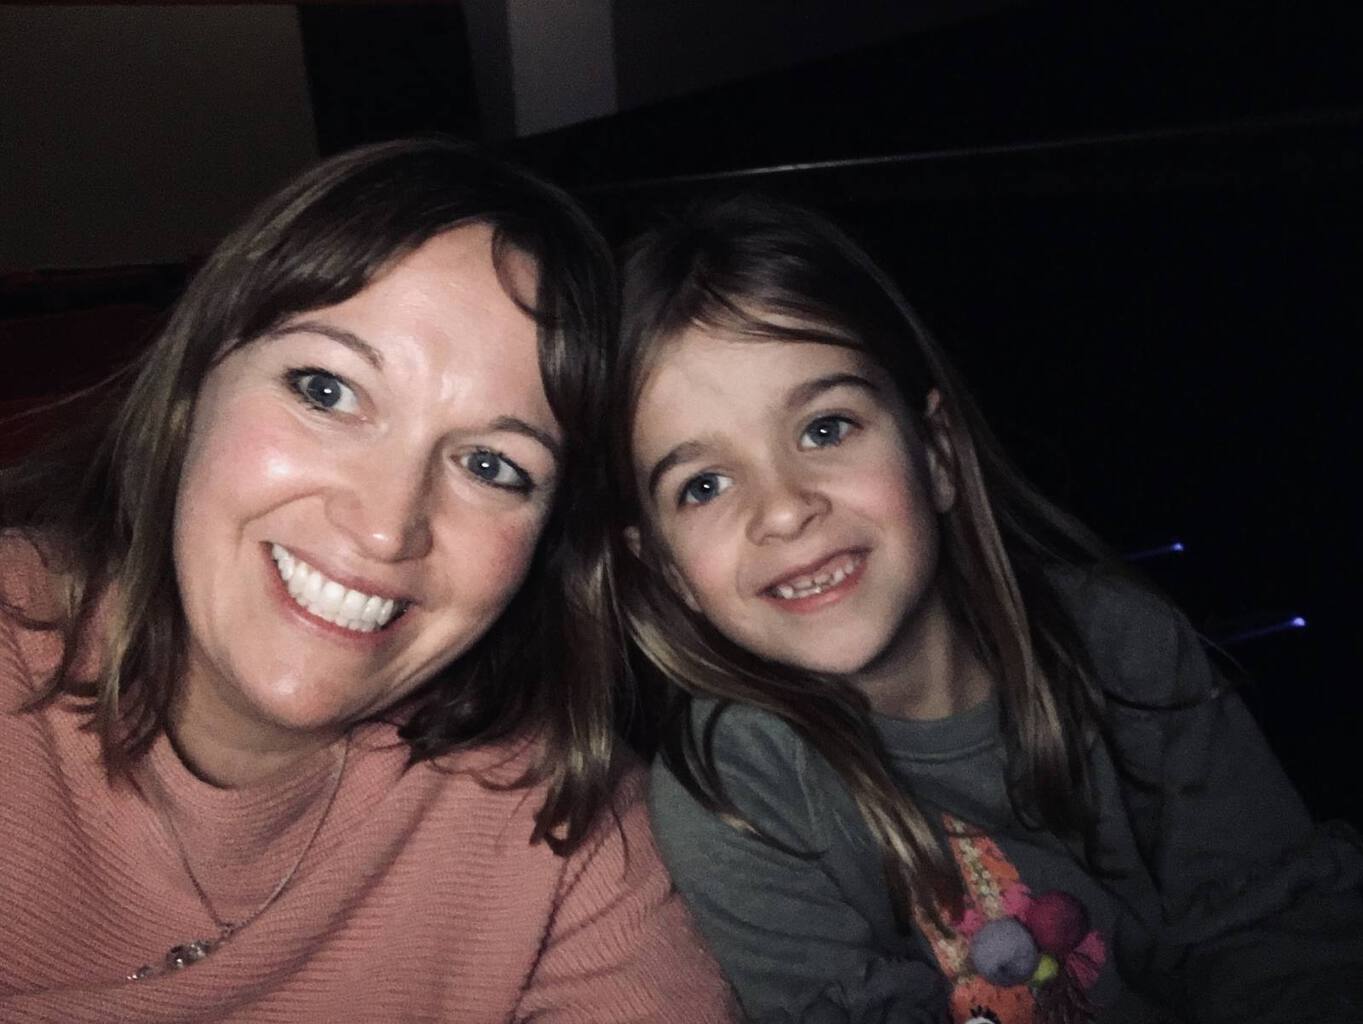 Bella Italia and a trip to the Cinema to see Mary Poppins Returns